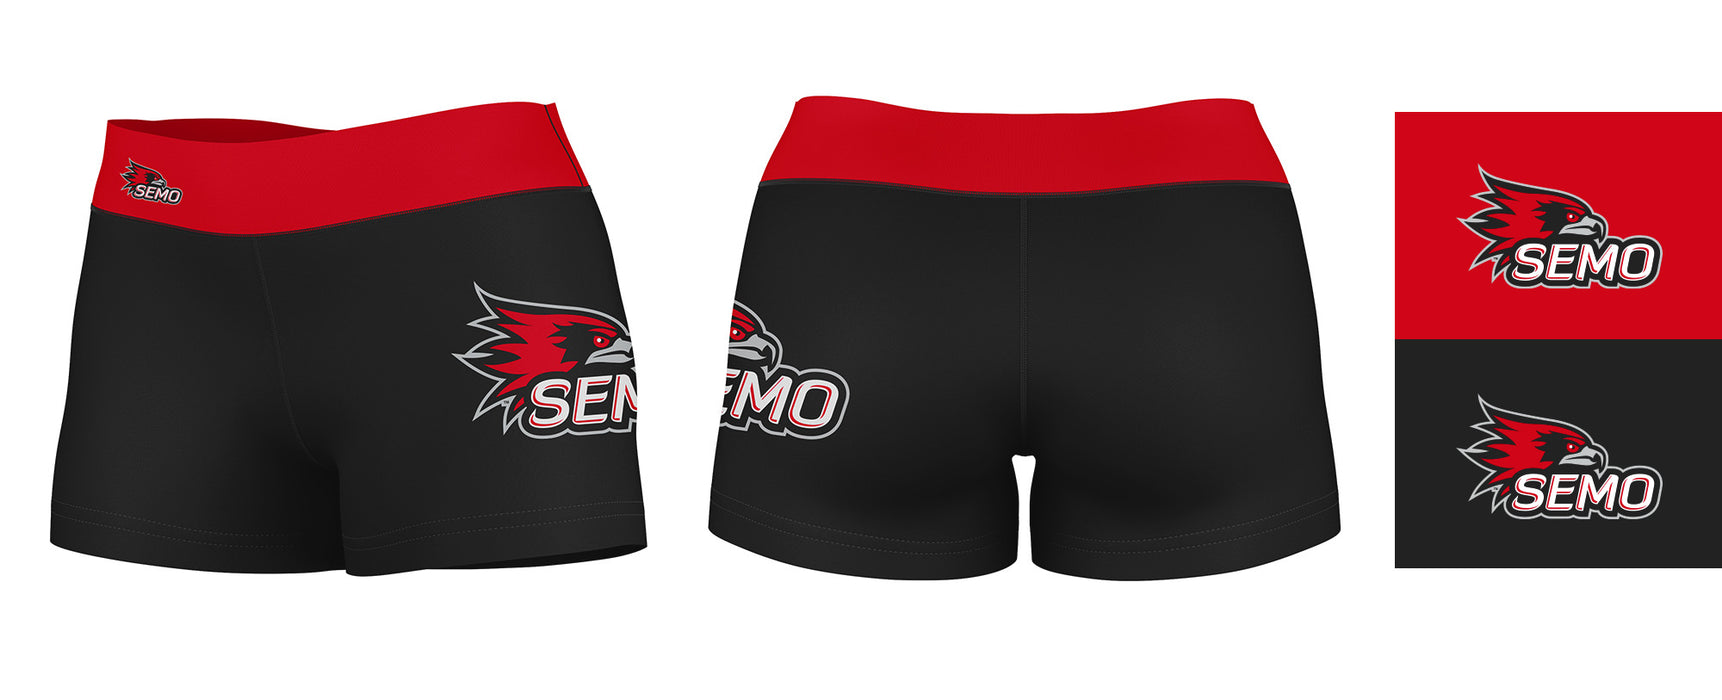 SEMO Redhawks Vive La Fete Game Day Logo on Thigh and Waistband Black & Red Women Yoga Booty Workout Shorts 3.75 Inseam" - Vive La Fête - Online Apparel Store